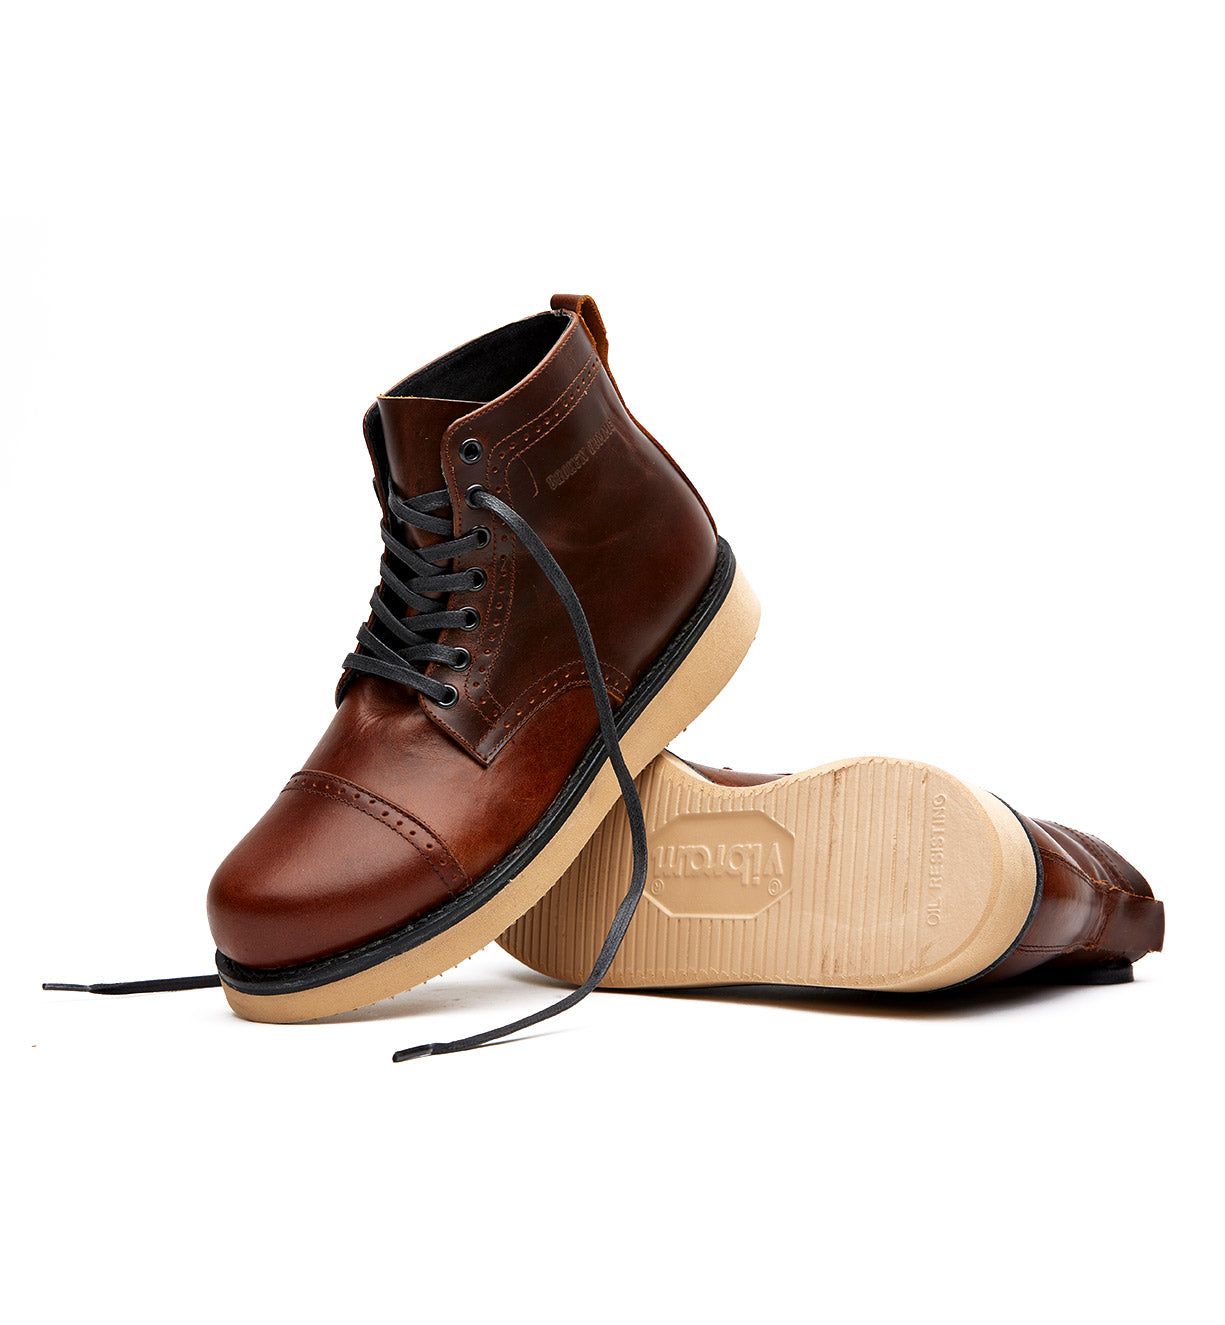 A pair of brown leather Broken Homme Shaun boots on a white background.